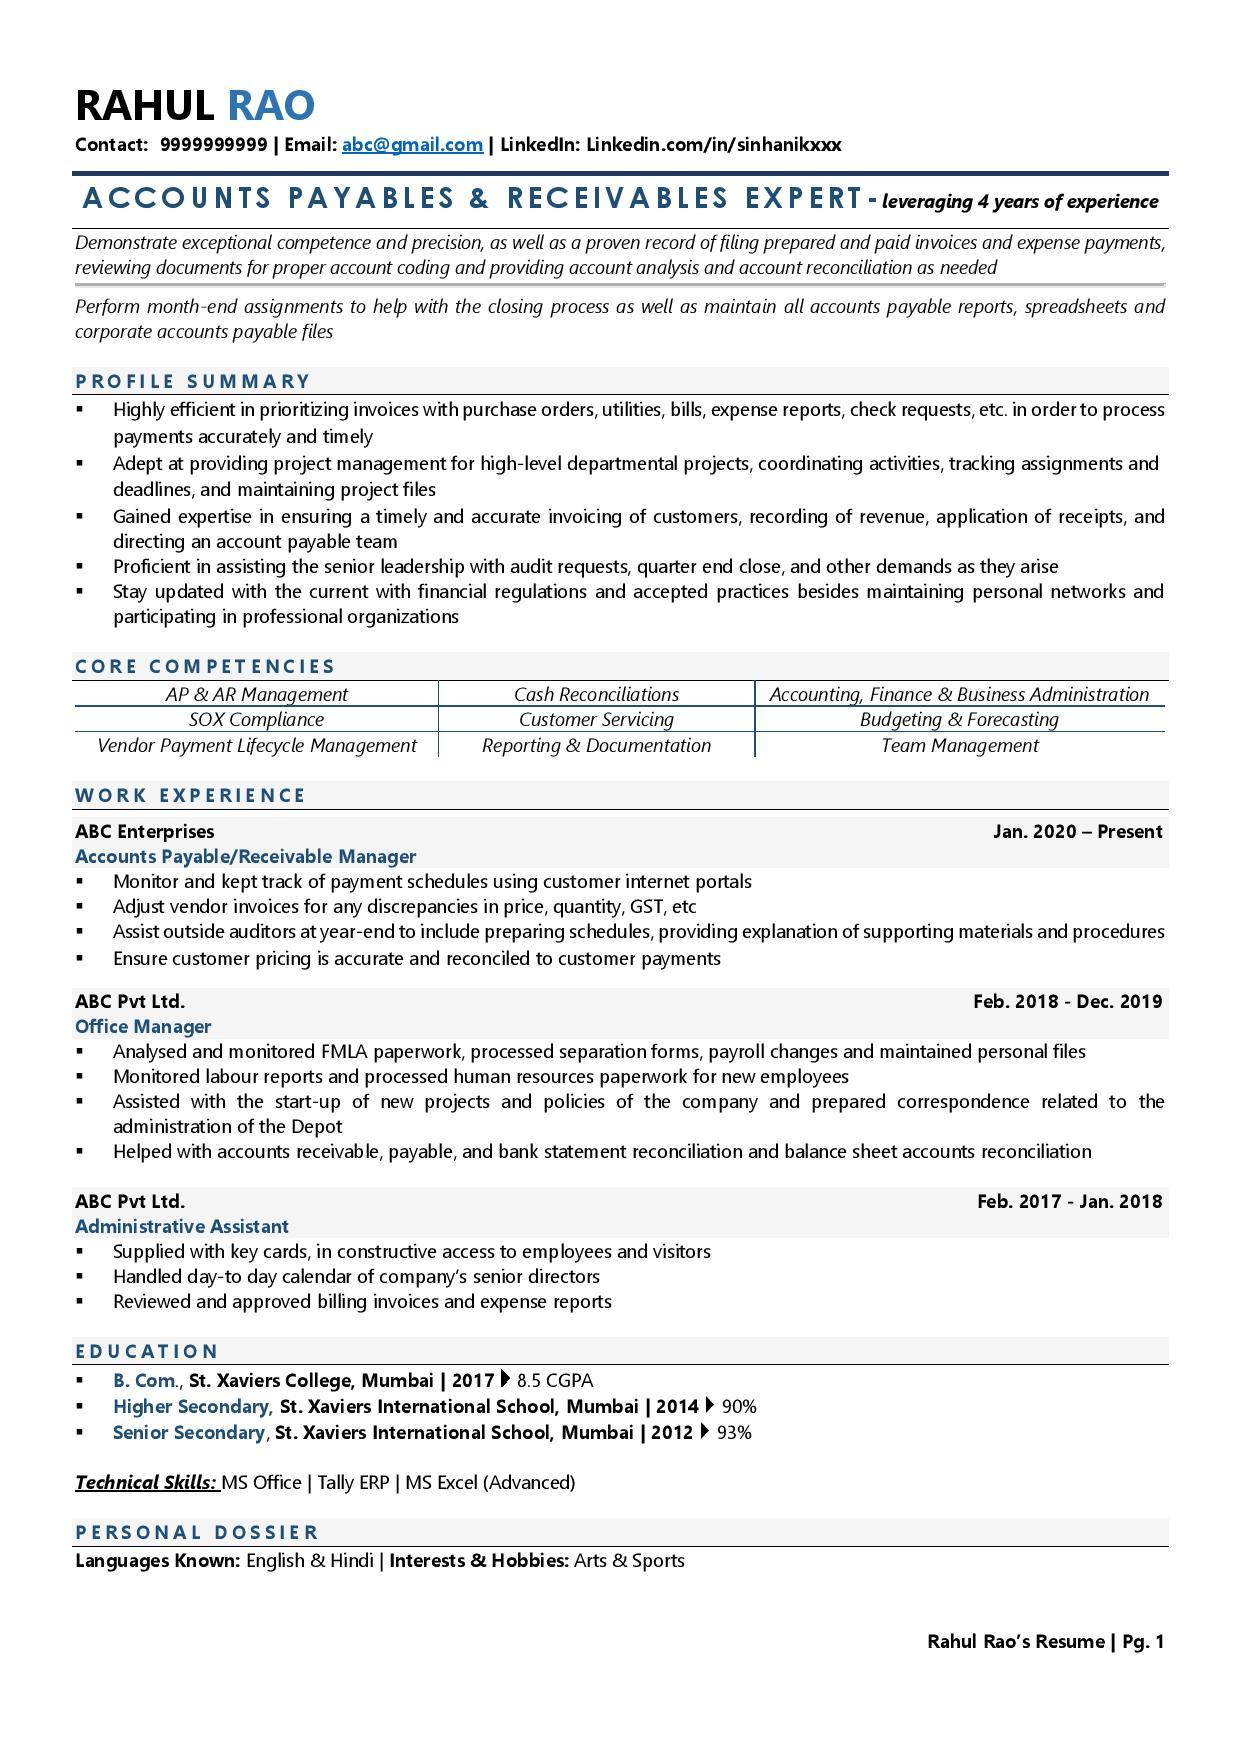 accounts-payable-receivable-resume-examples-template-with-job